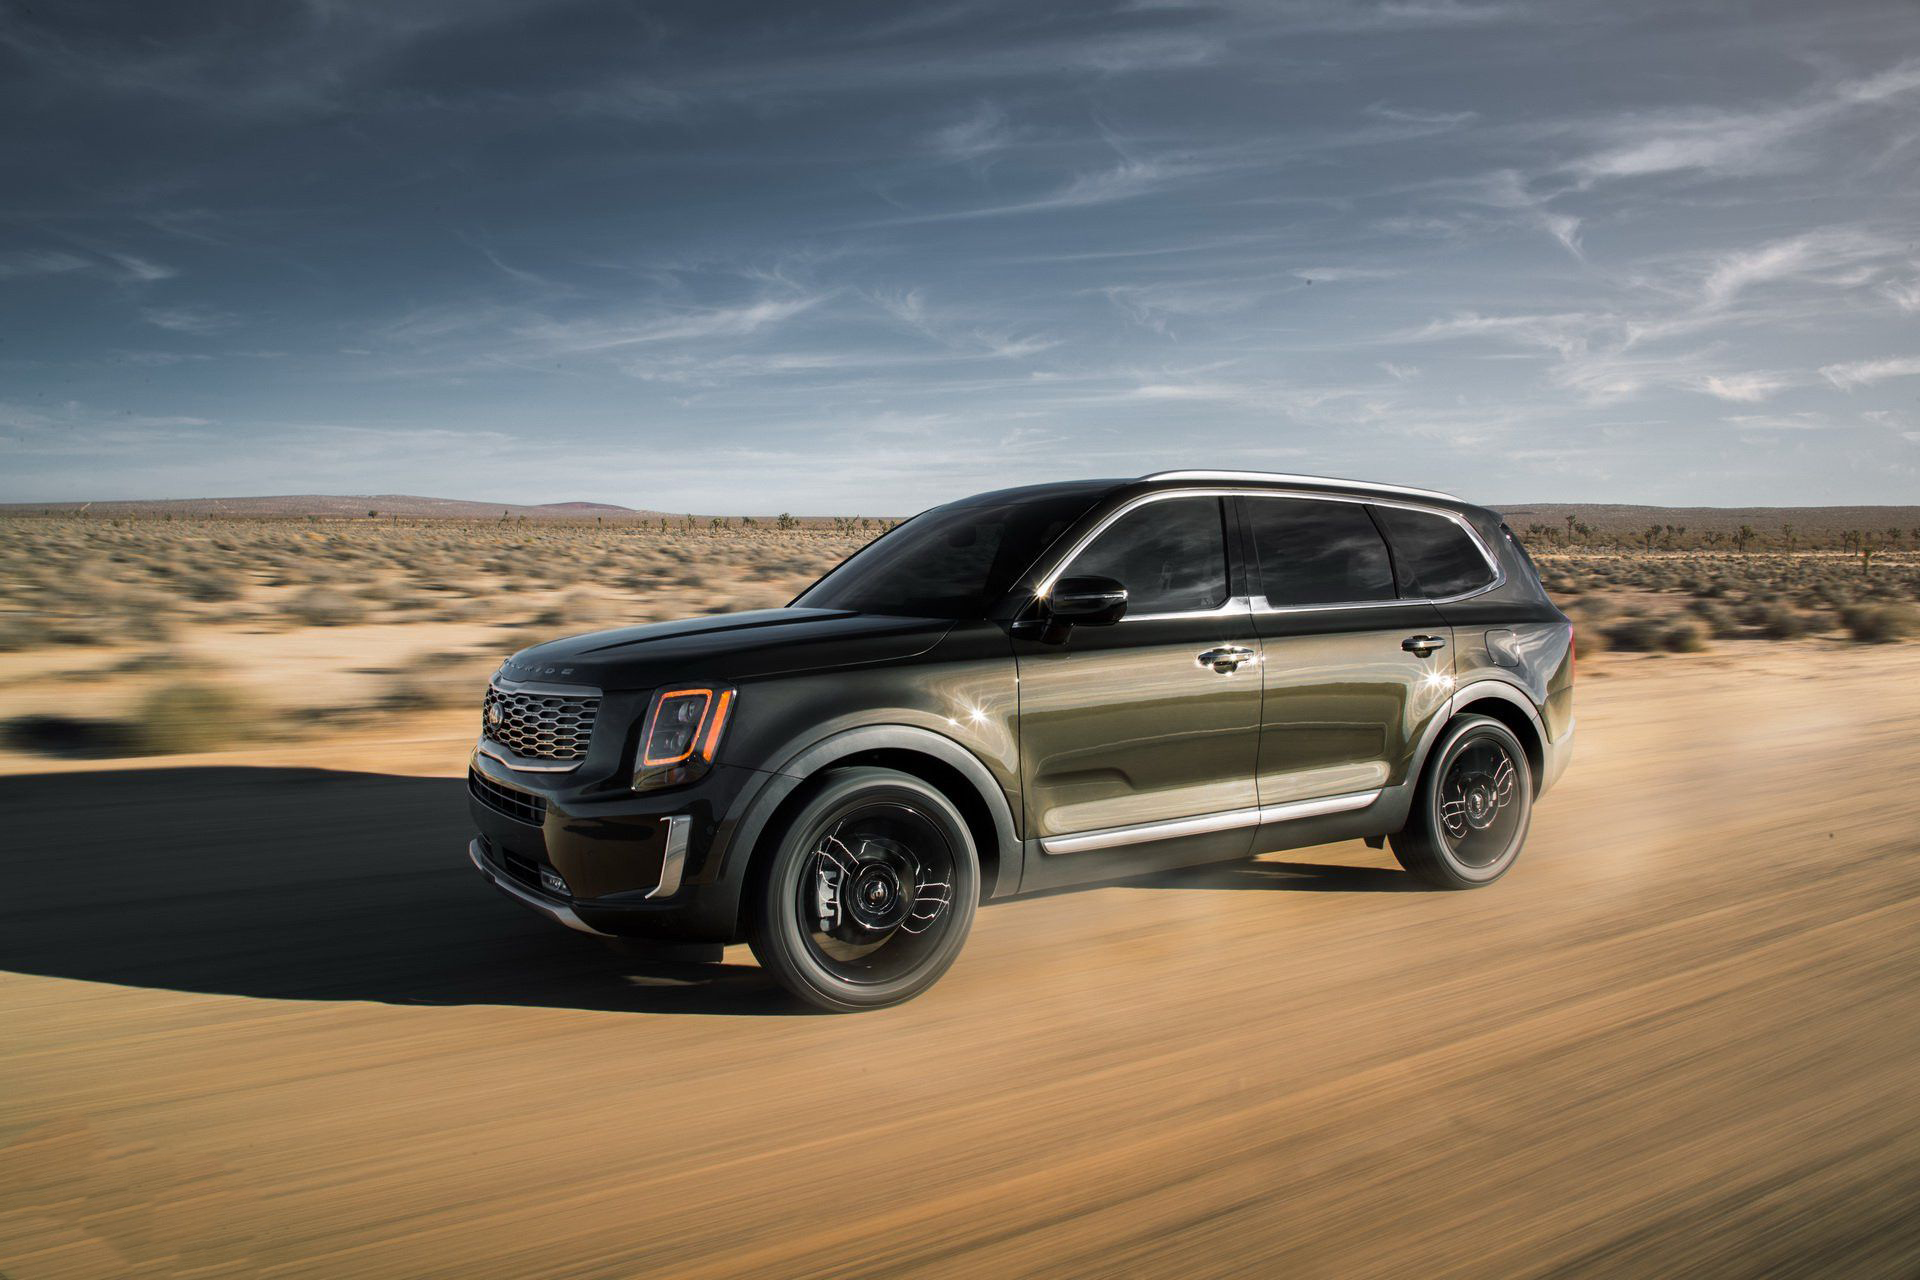 2020 Kia Telluride Officially Begins its Production